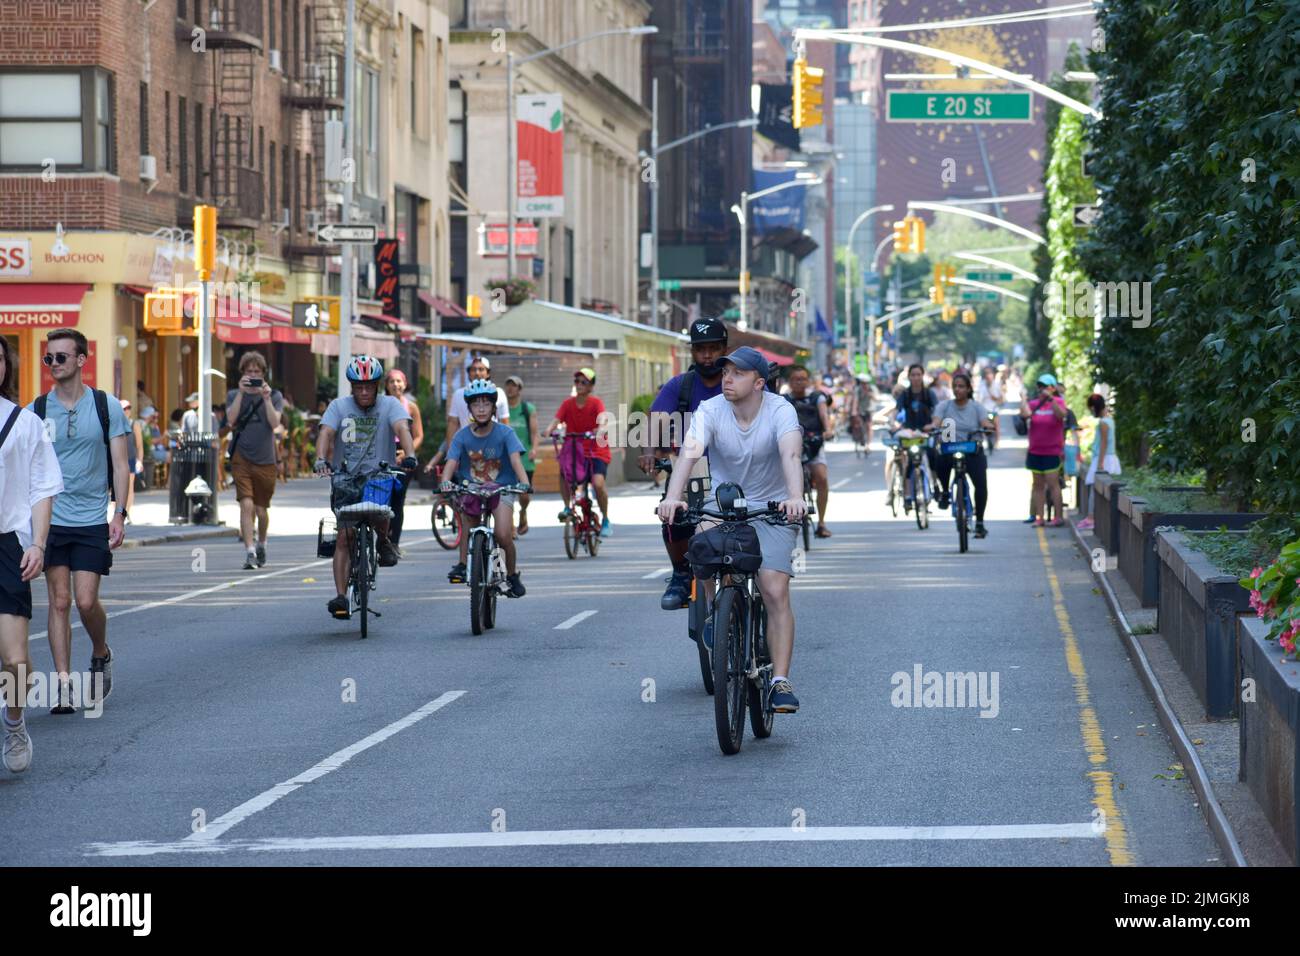 New Yorkers are seen biking on Park Avenue near Union Square during car free “Summer Streets” along Park Avenue in New York City. Stock Photo